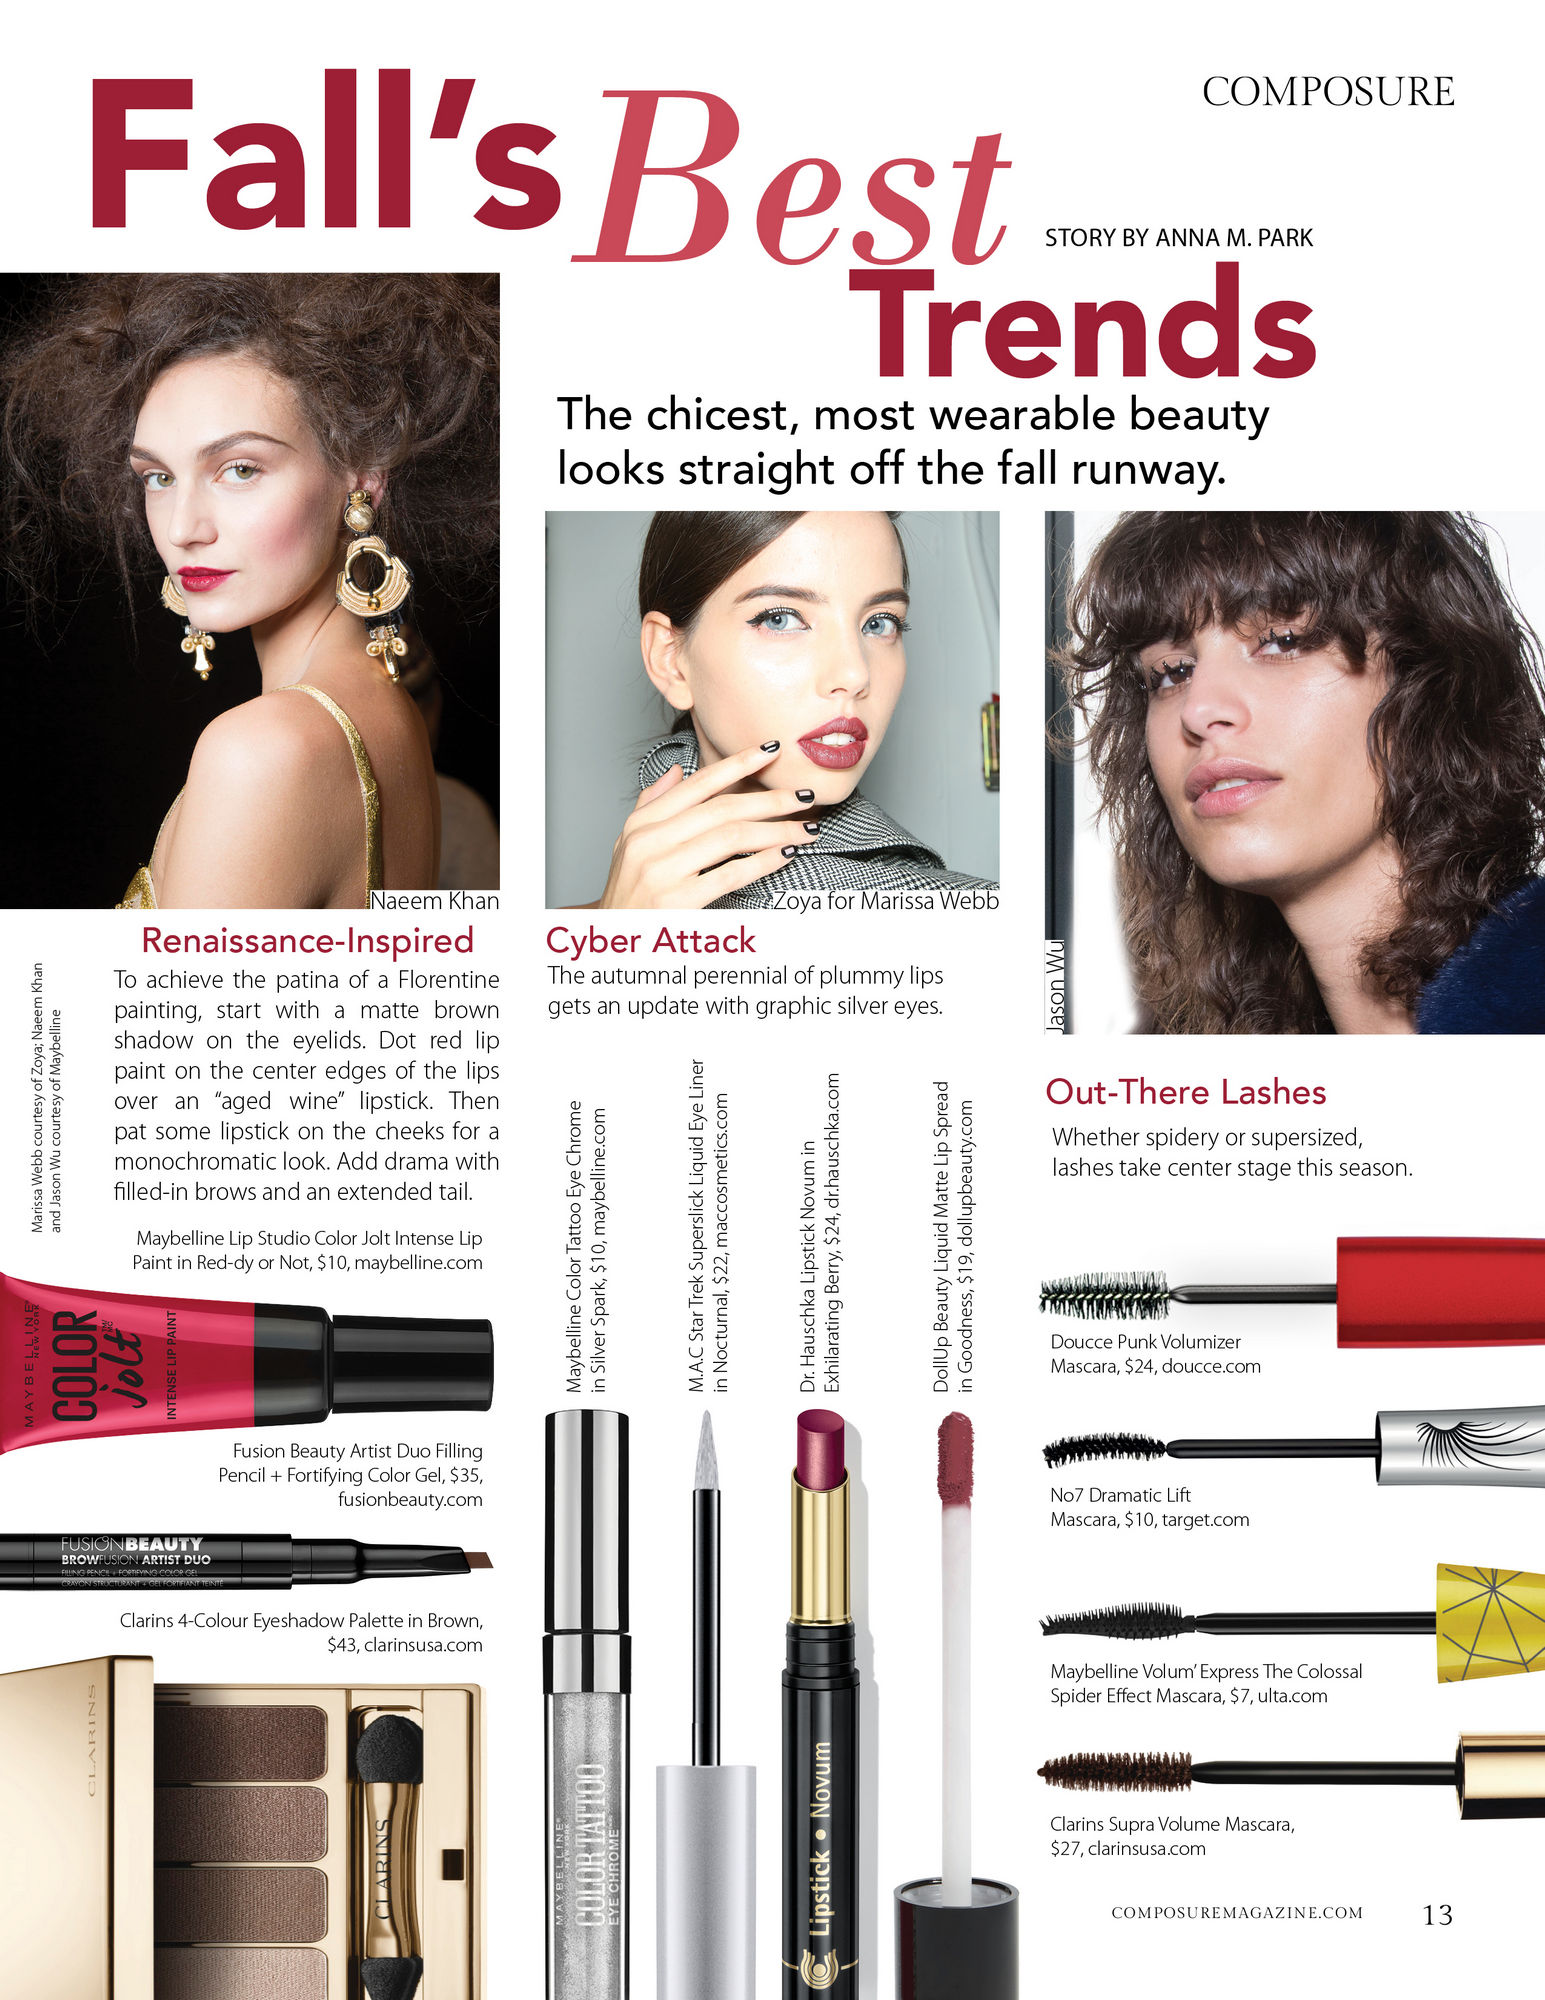 Fall's Best Trends: The chicest, most wearable beauty looks straight off the fall runway.